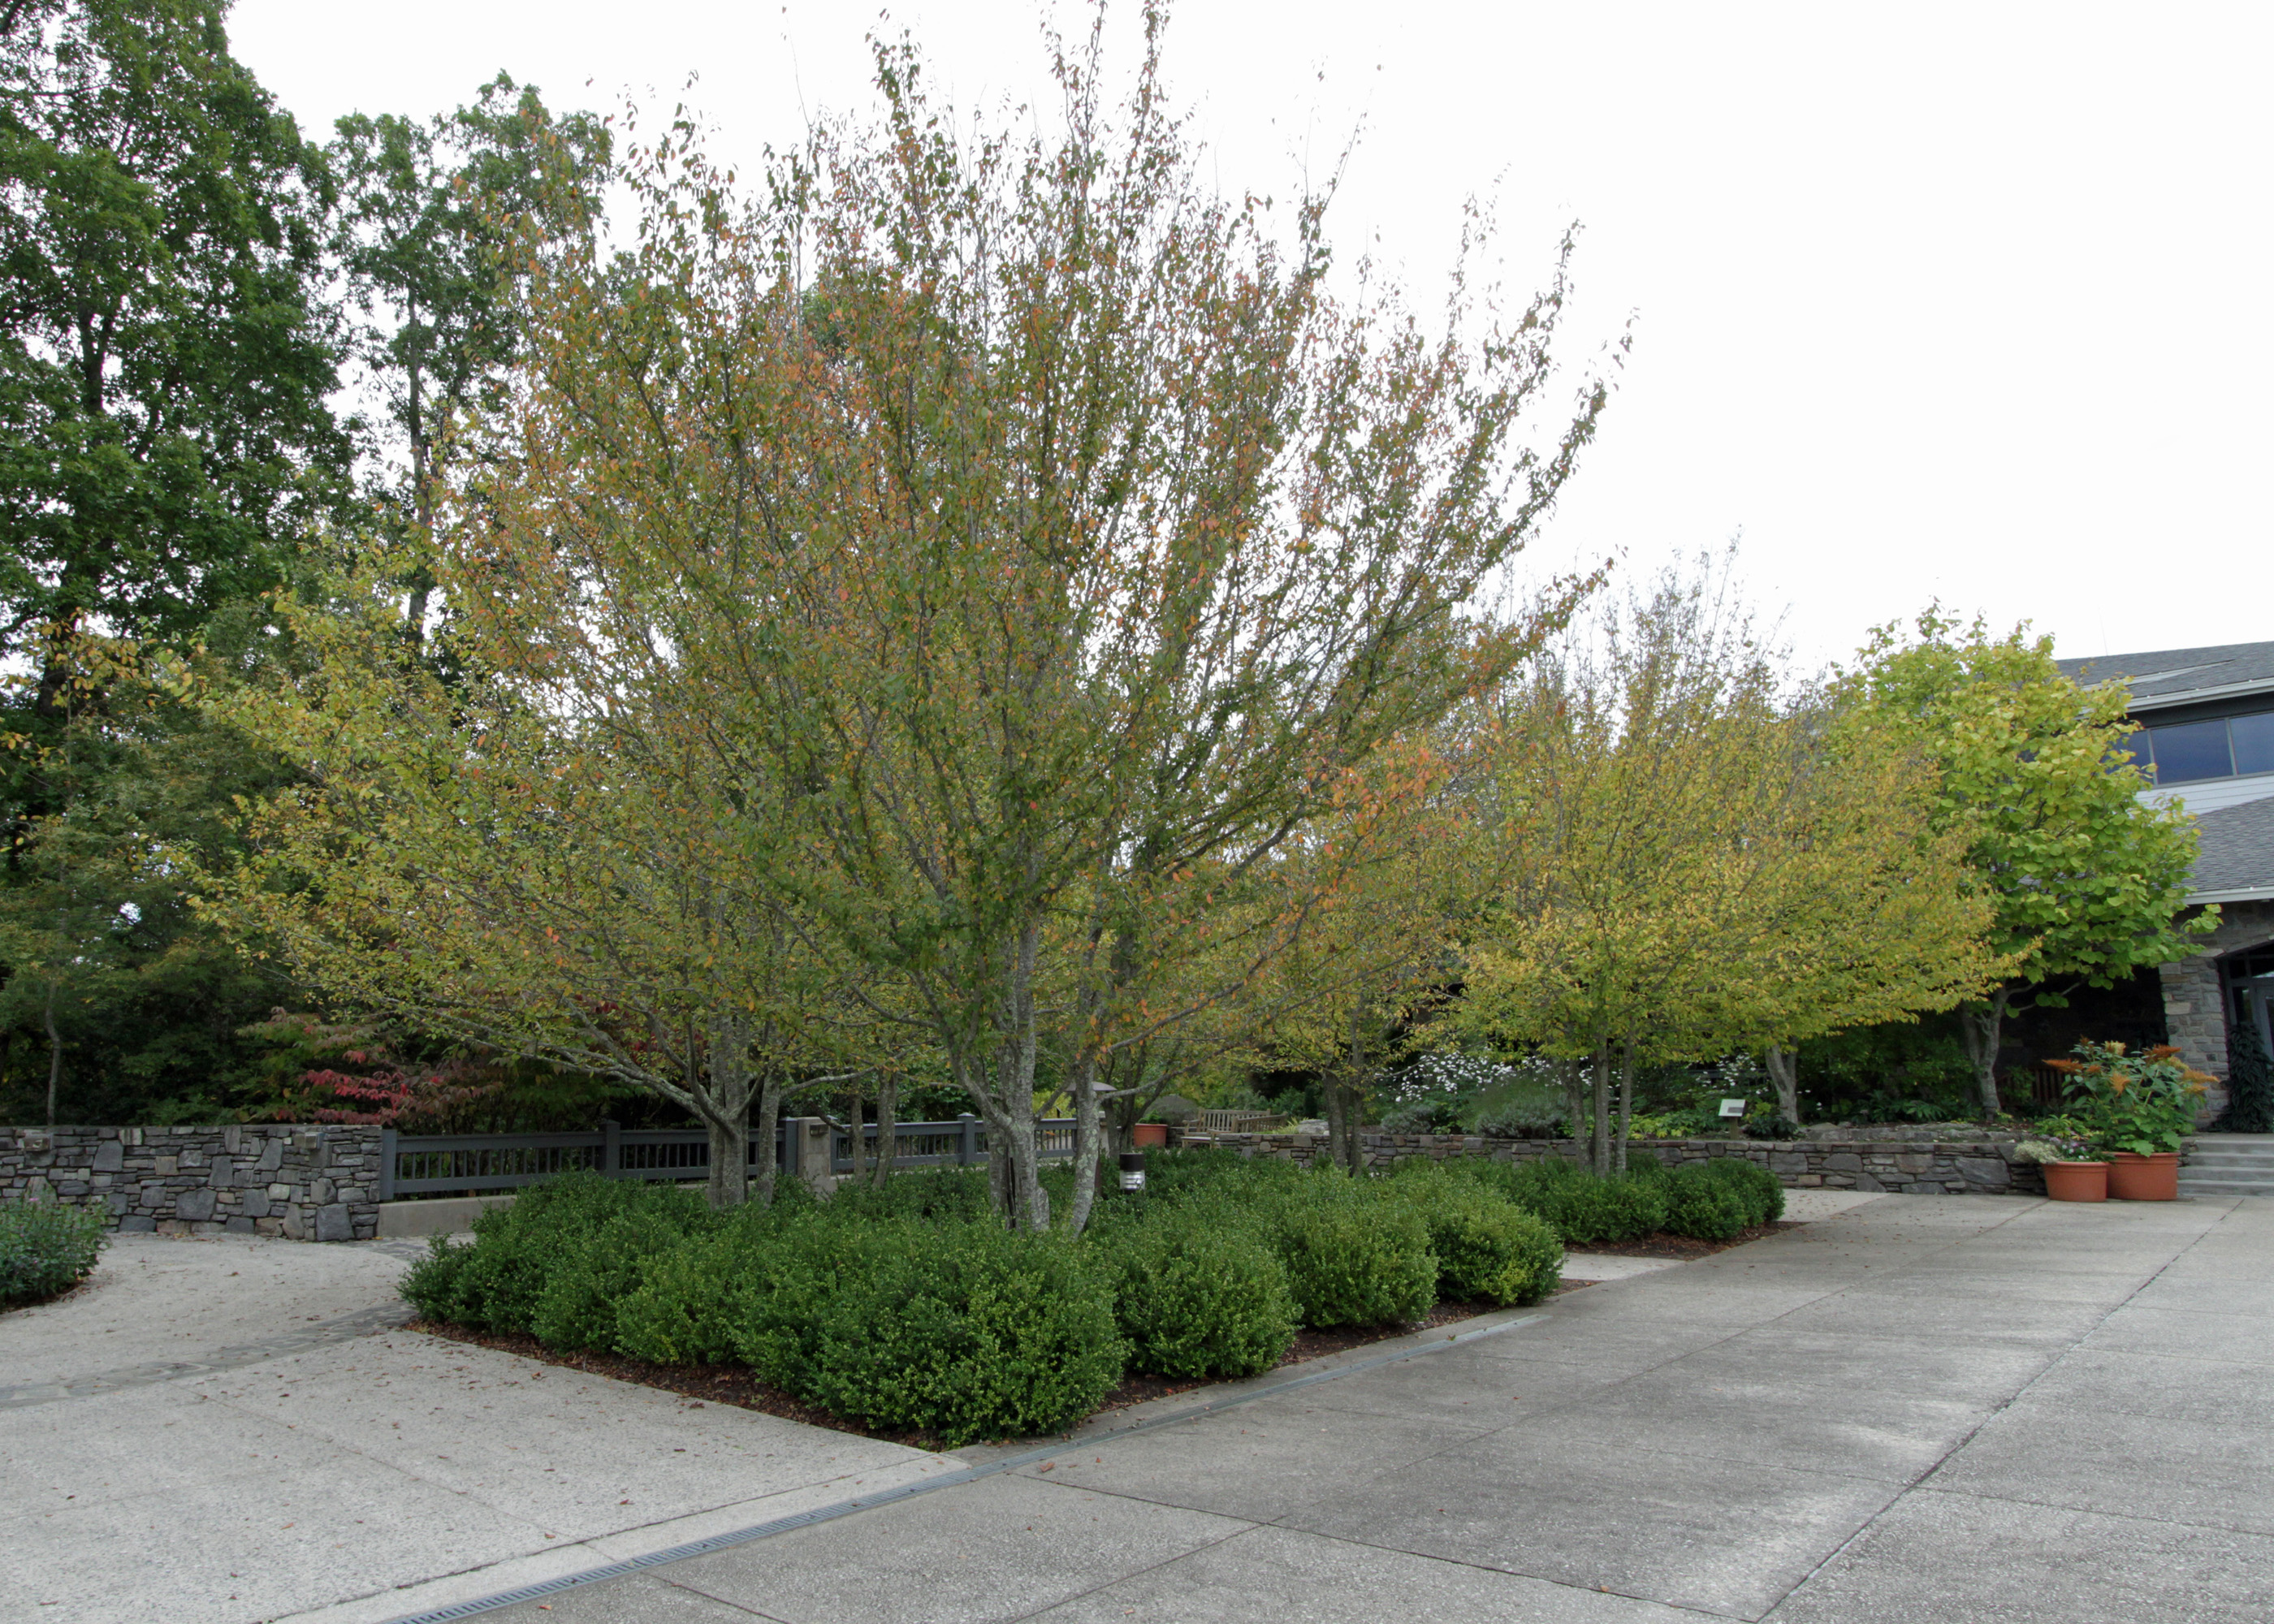 The Scientific Name is Carpinus caroliniana. You will likely hear them called American Hornbeam, Ironwood, Musclewood, Blue Beech. This picture shows the A well-maintained grouping of Carpinus caroliniana at the North Carolina Arboretum. of Carpinus caroliniana